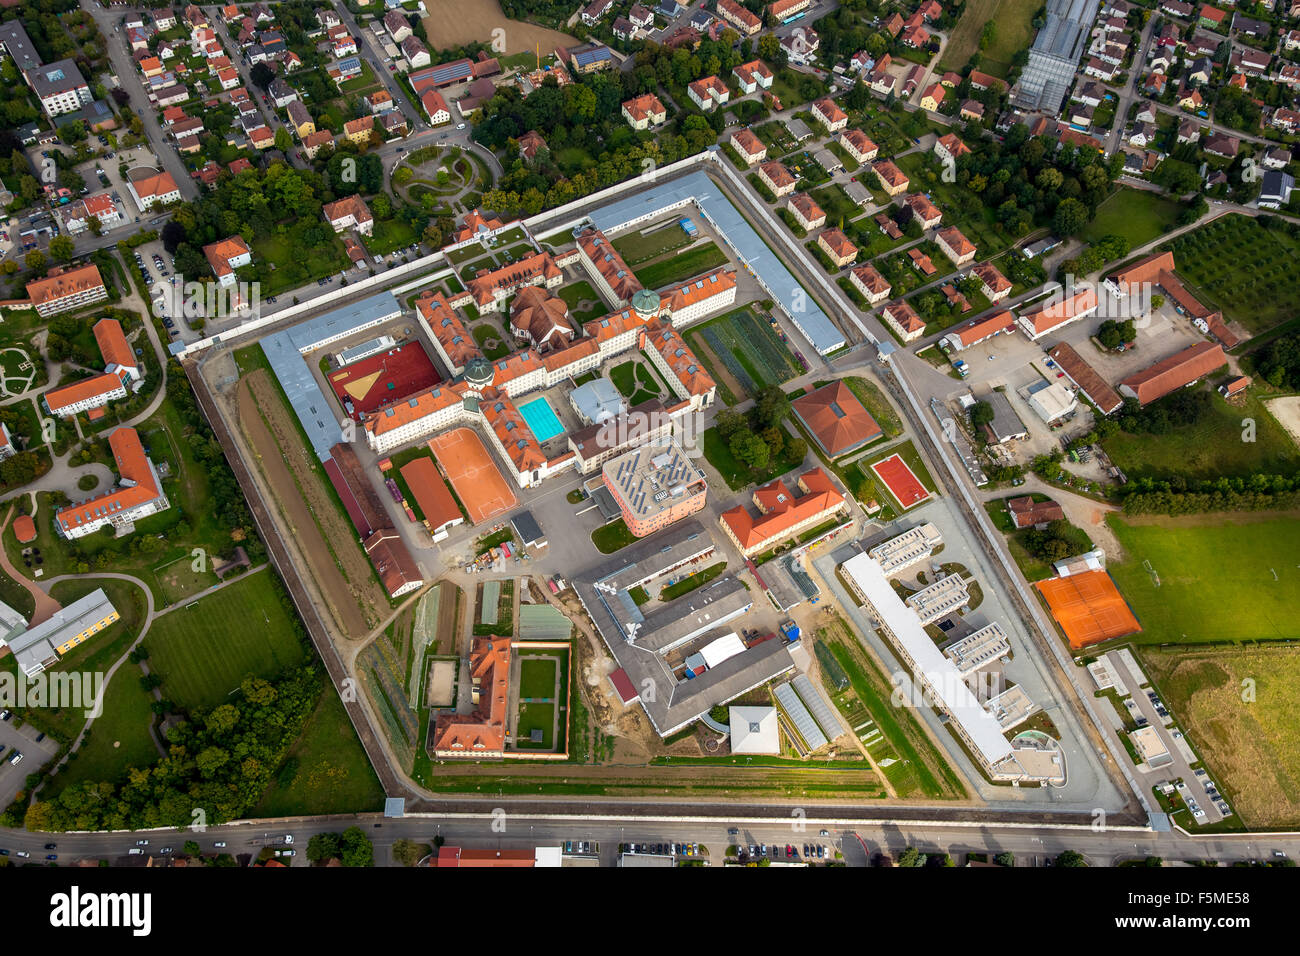 Straubing young offenders' institution, correctional facility Bayern, Straubing, Lower Bavaria, Bavaria, Germany Stock Photo